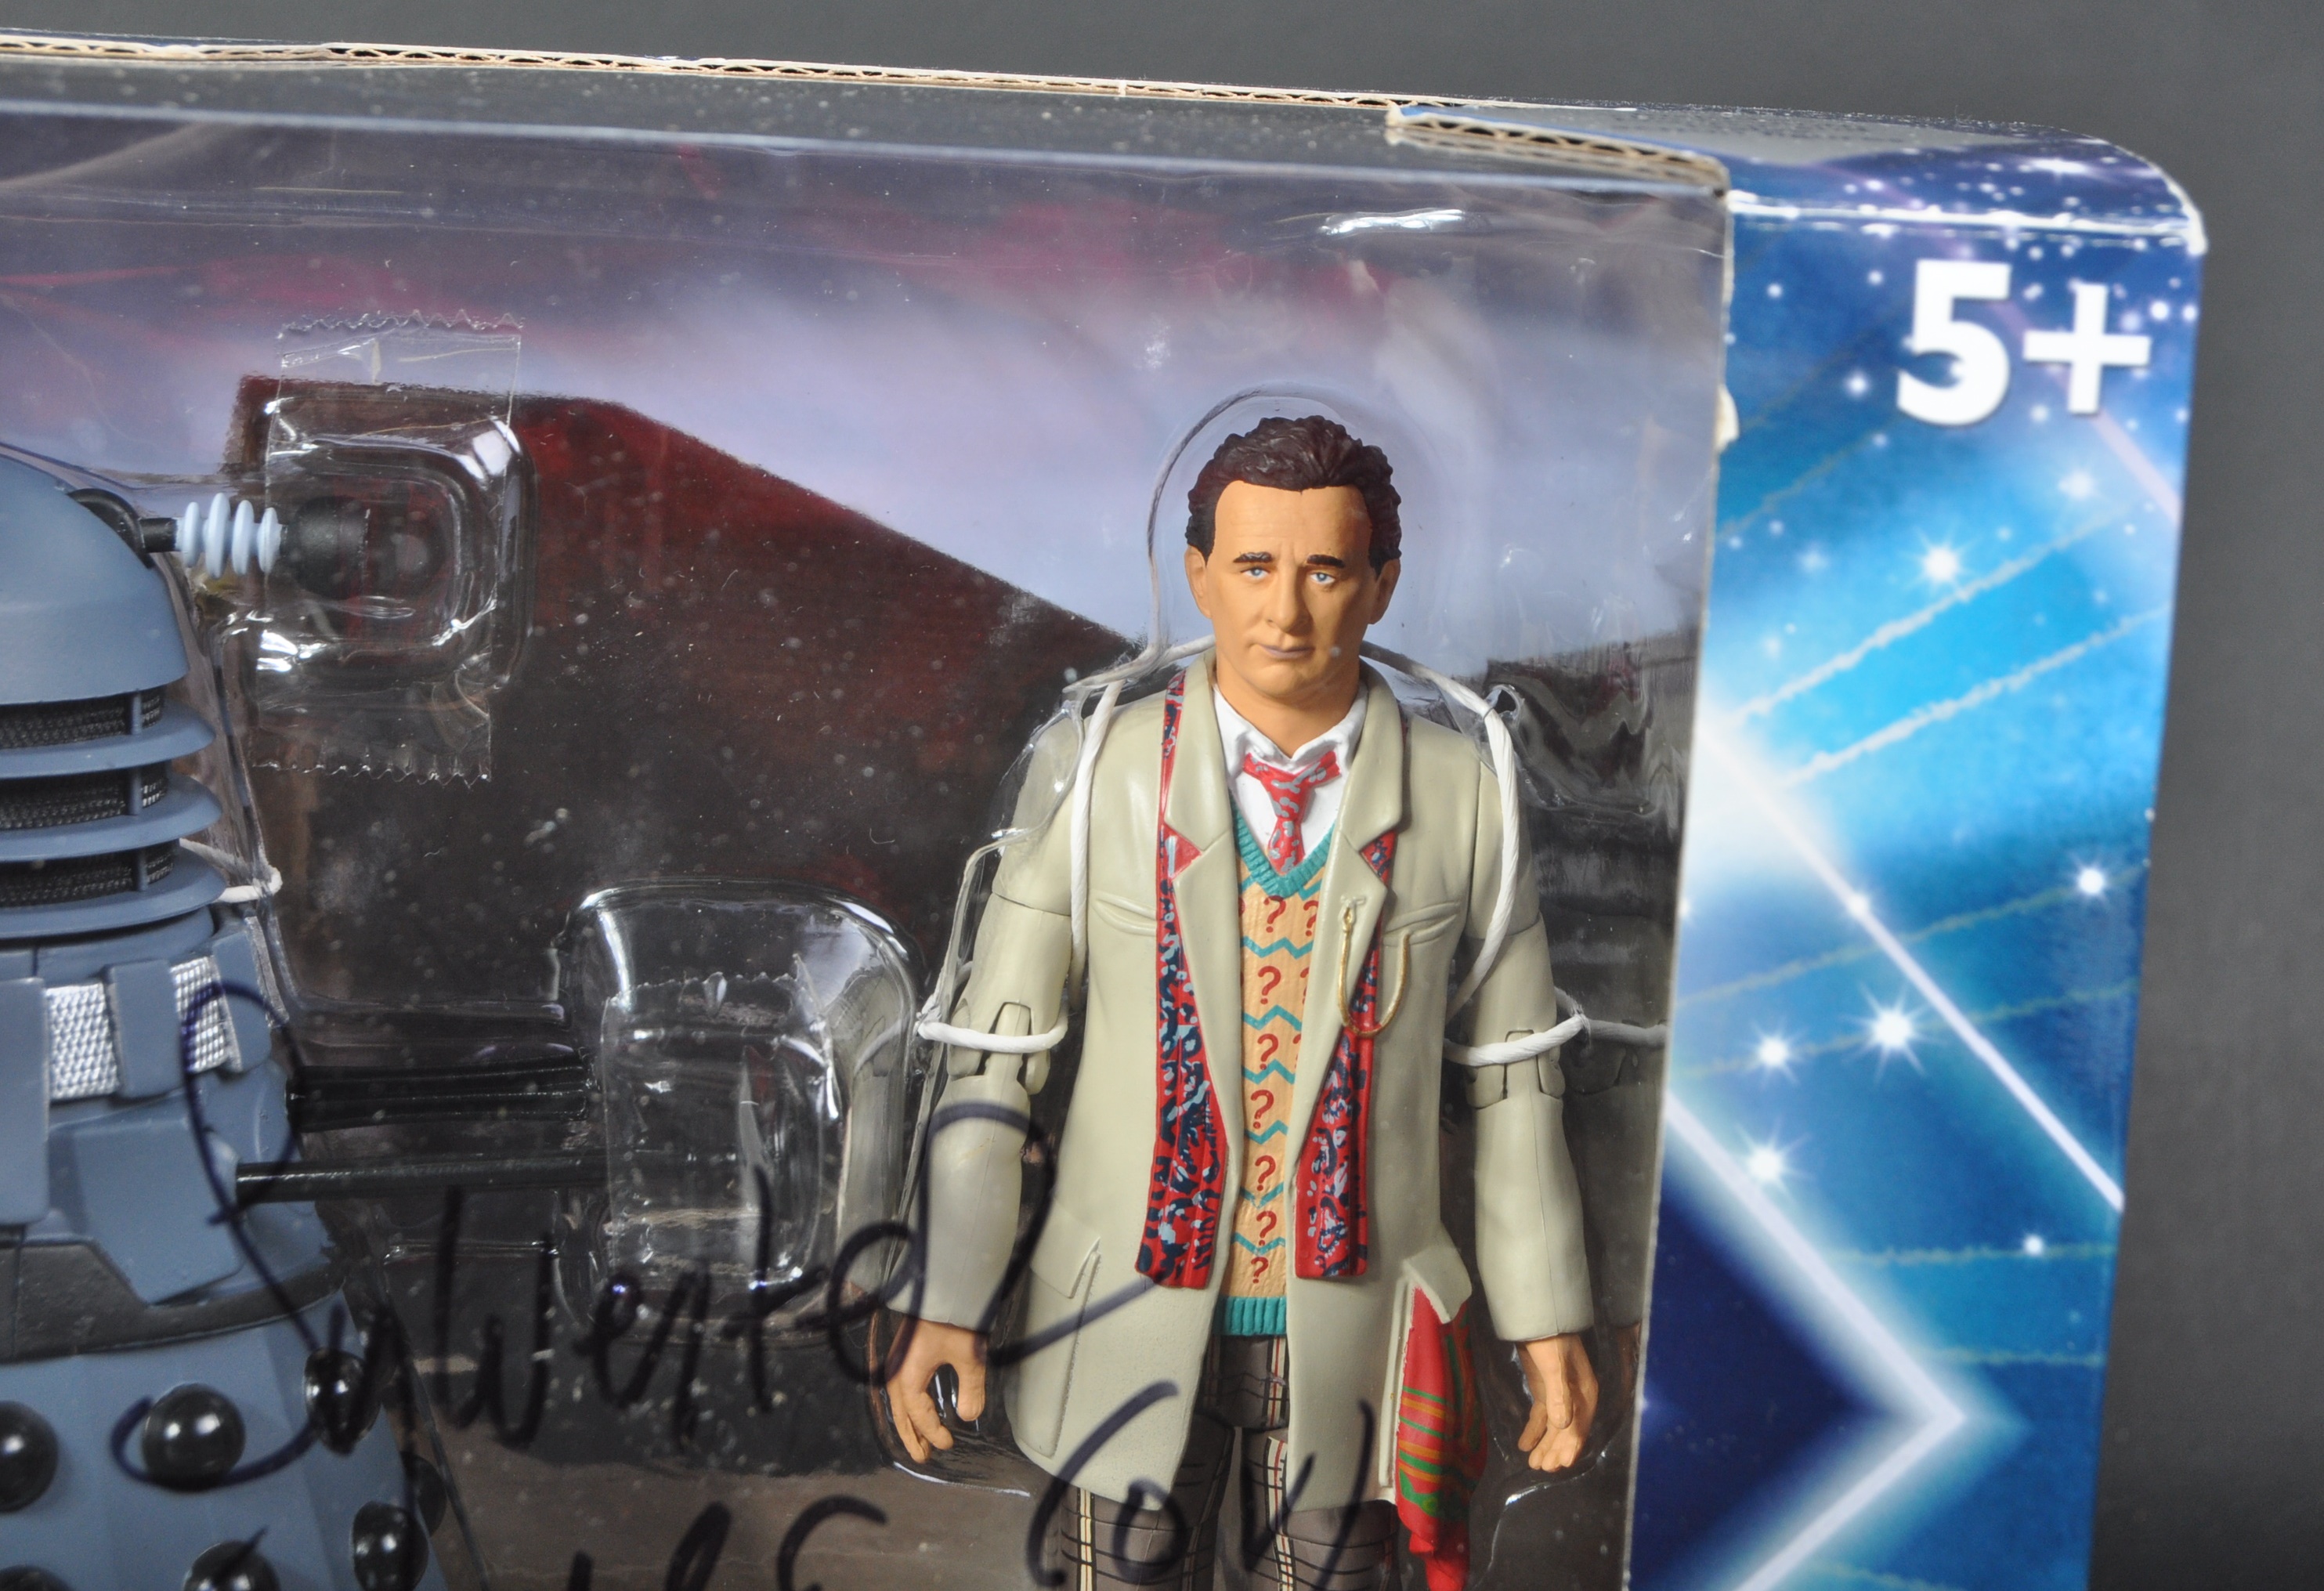 DOCTOR WHO - SYLVESTER MCCOY AUTOGRAPHED ACTION FIGURE - Image 2 of 5